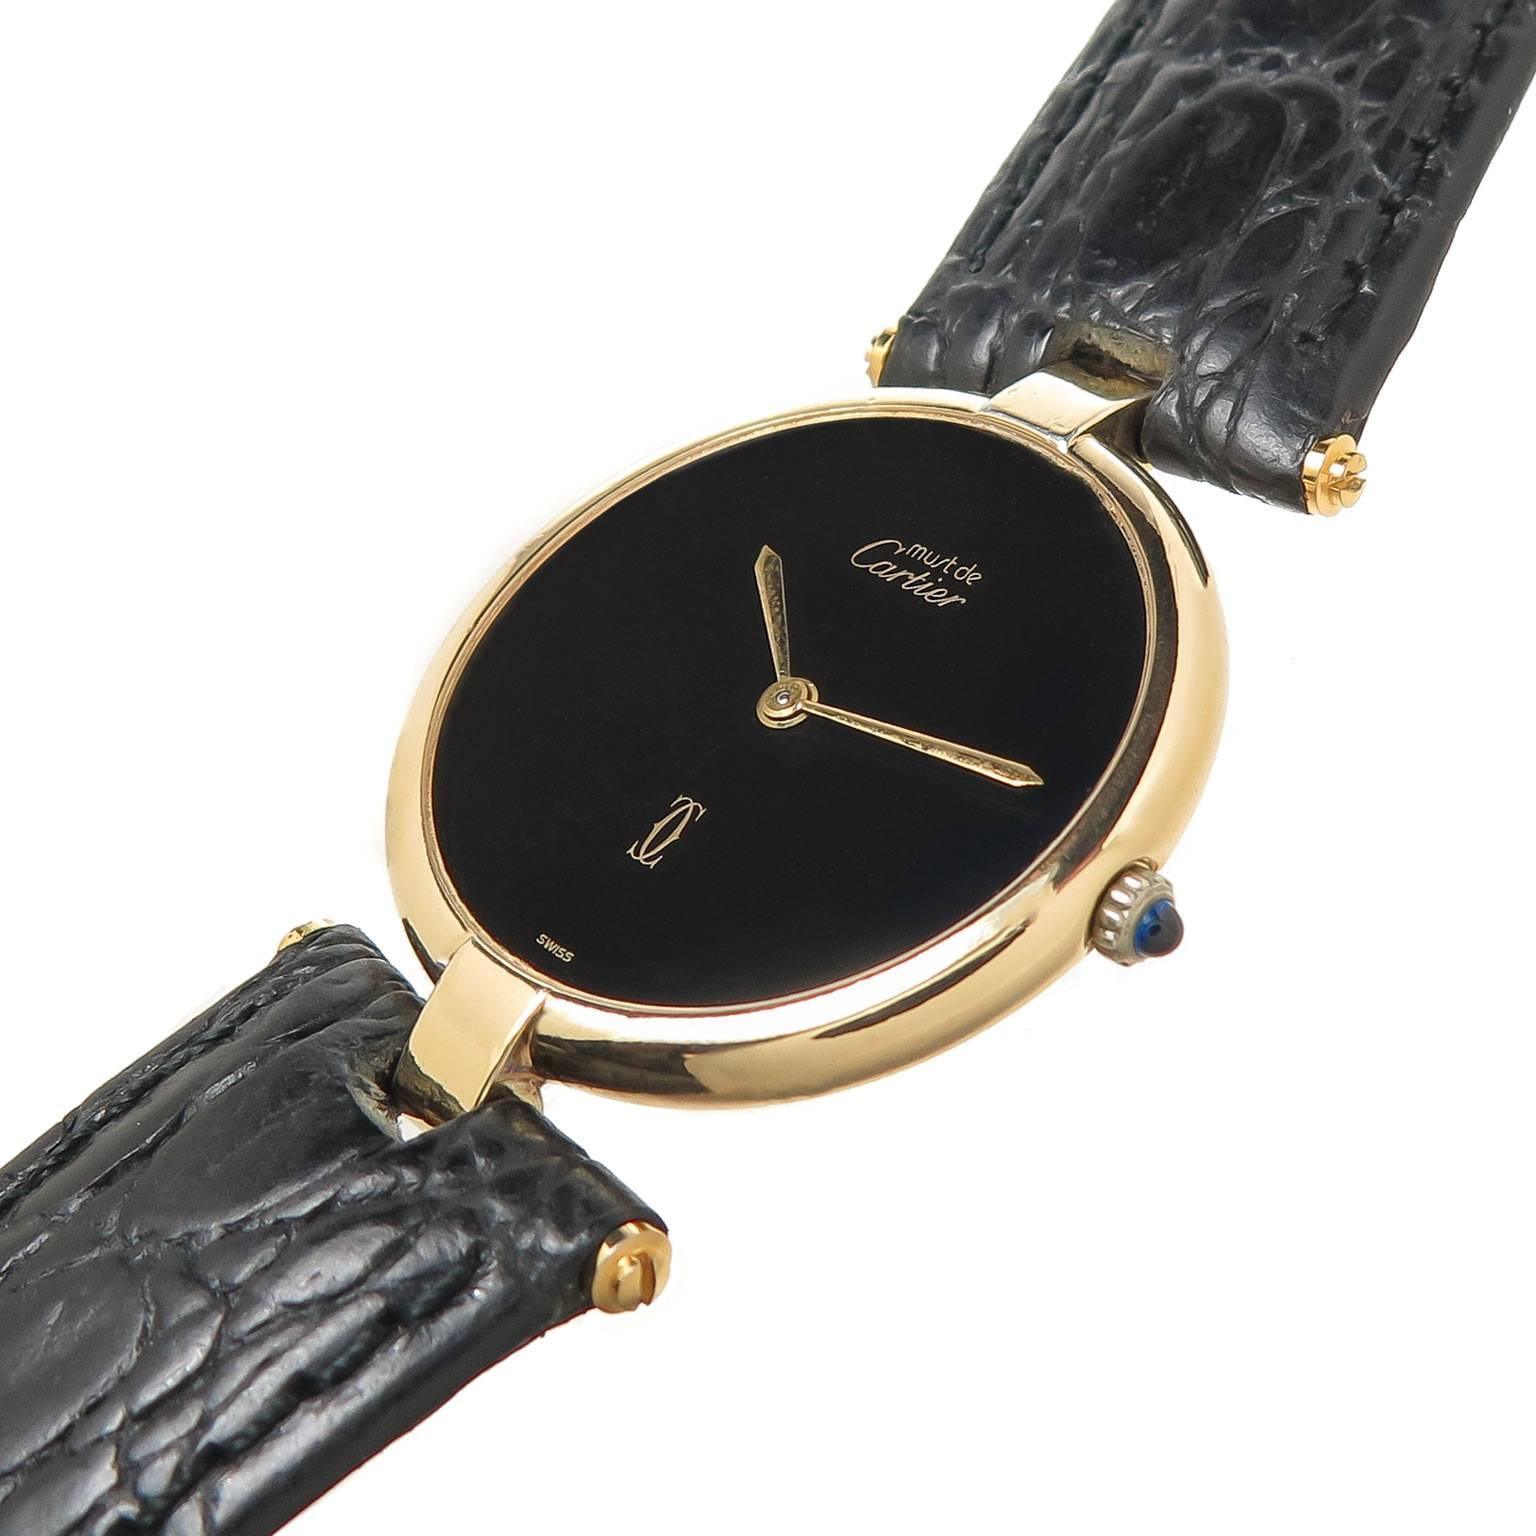 Circa 2000 Cartier Vendome, Must de Cartier  Wrist Watch, 30 MM Gold Plate, Sterling Silver ( Vermeil ) Case. Quartz Movement, Black Dial and a Sapphire Crown. Hadley Roma, Black leather strap with a Gold Plate Cartier Tang Buckle. Comes in a